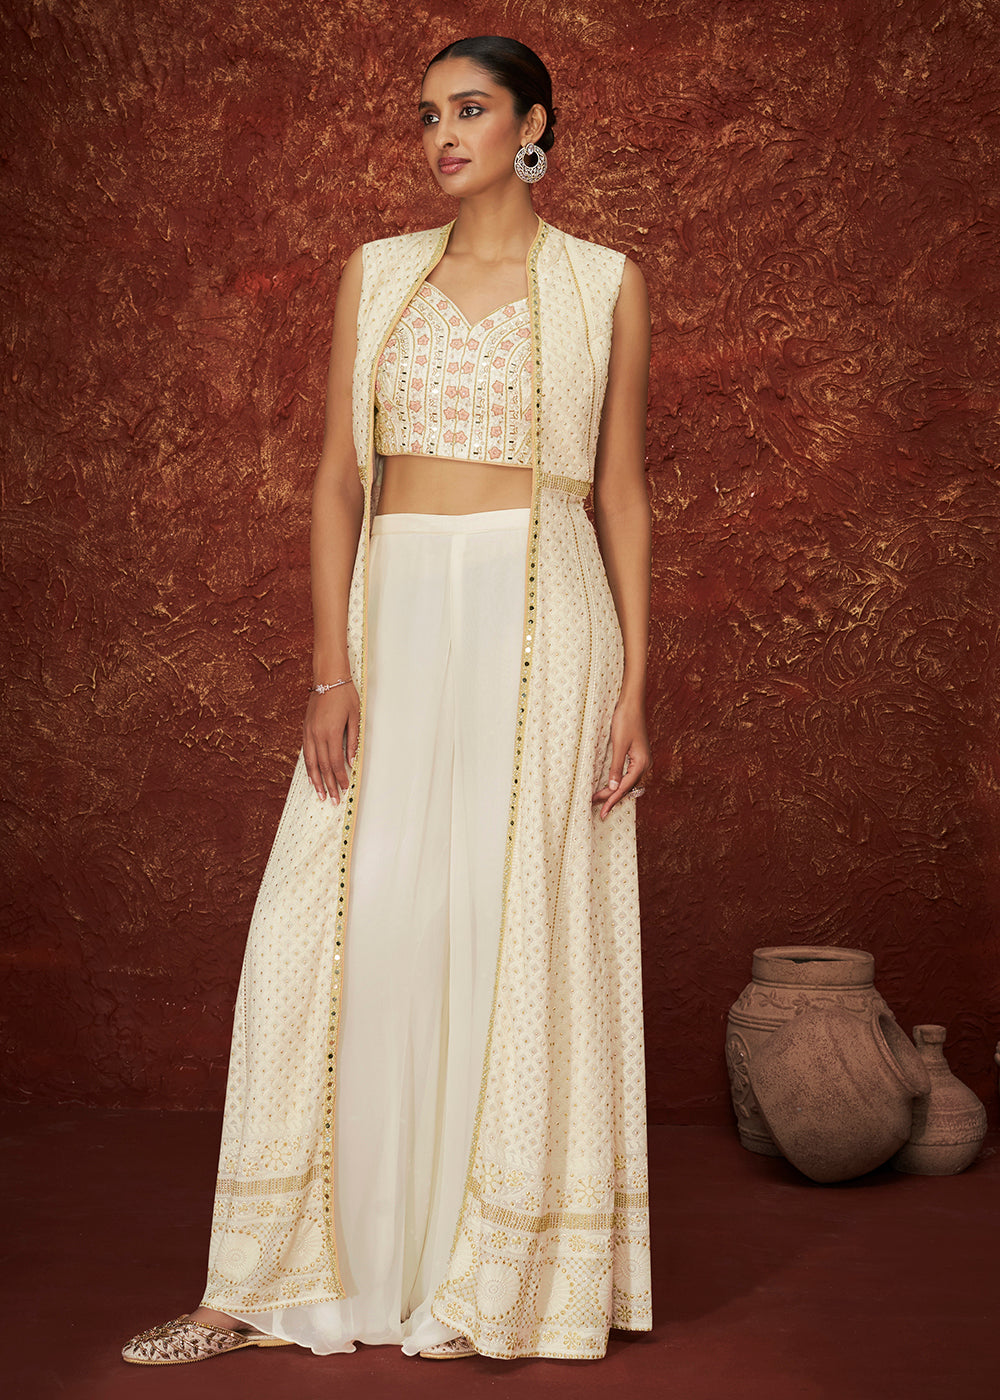 Buy Now Designer Pearl White Crop Top Wedding Palazzo Salwar Suit Online in USA, UK, Canada, Germany & Worldwide at Empress Clothing.